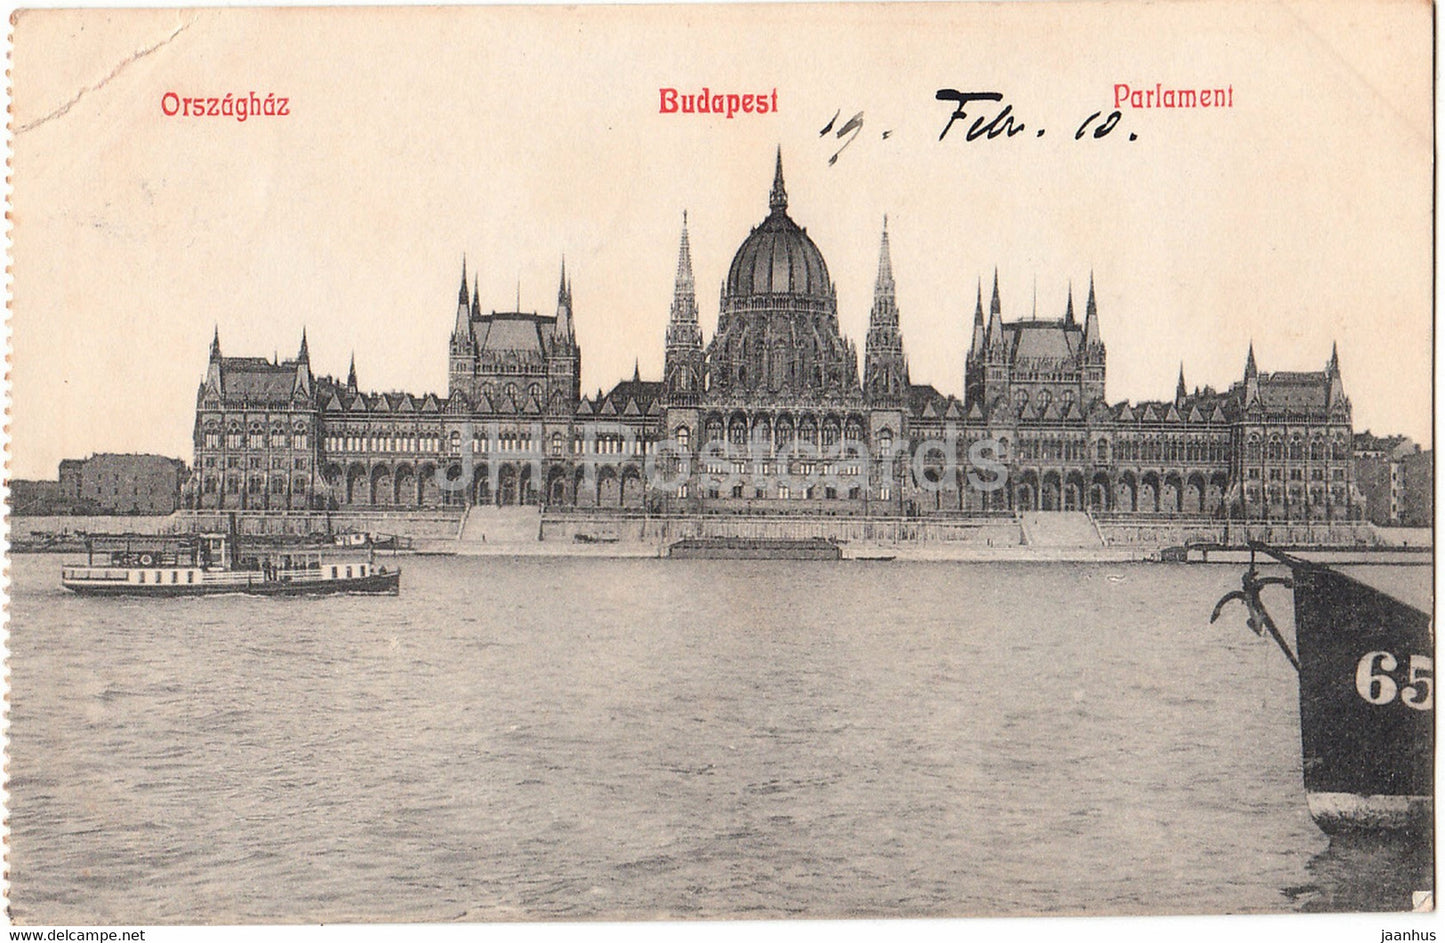 Budapest - Orszaghaz - Parlament - steamer boat - old postcard - 1910 - Hungary - used - JH Postcards